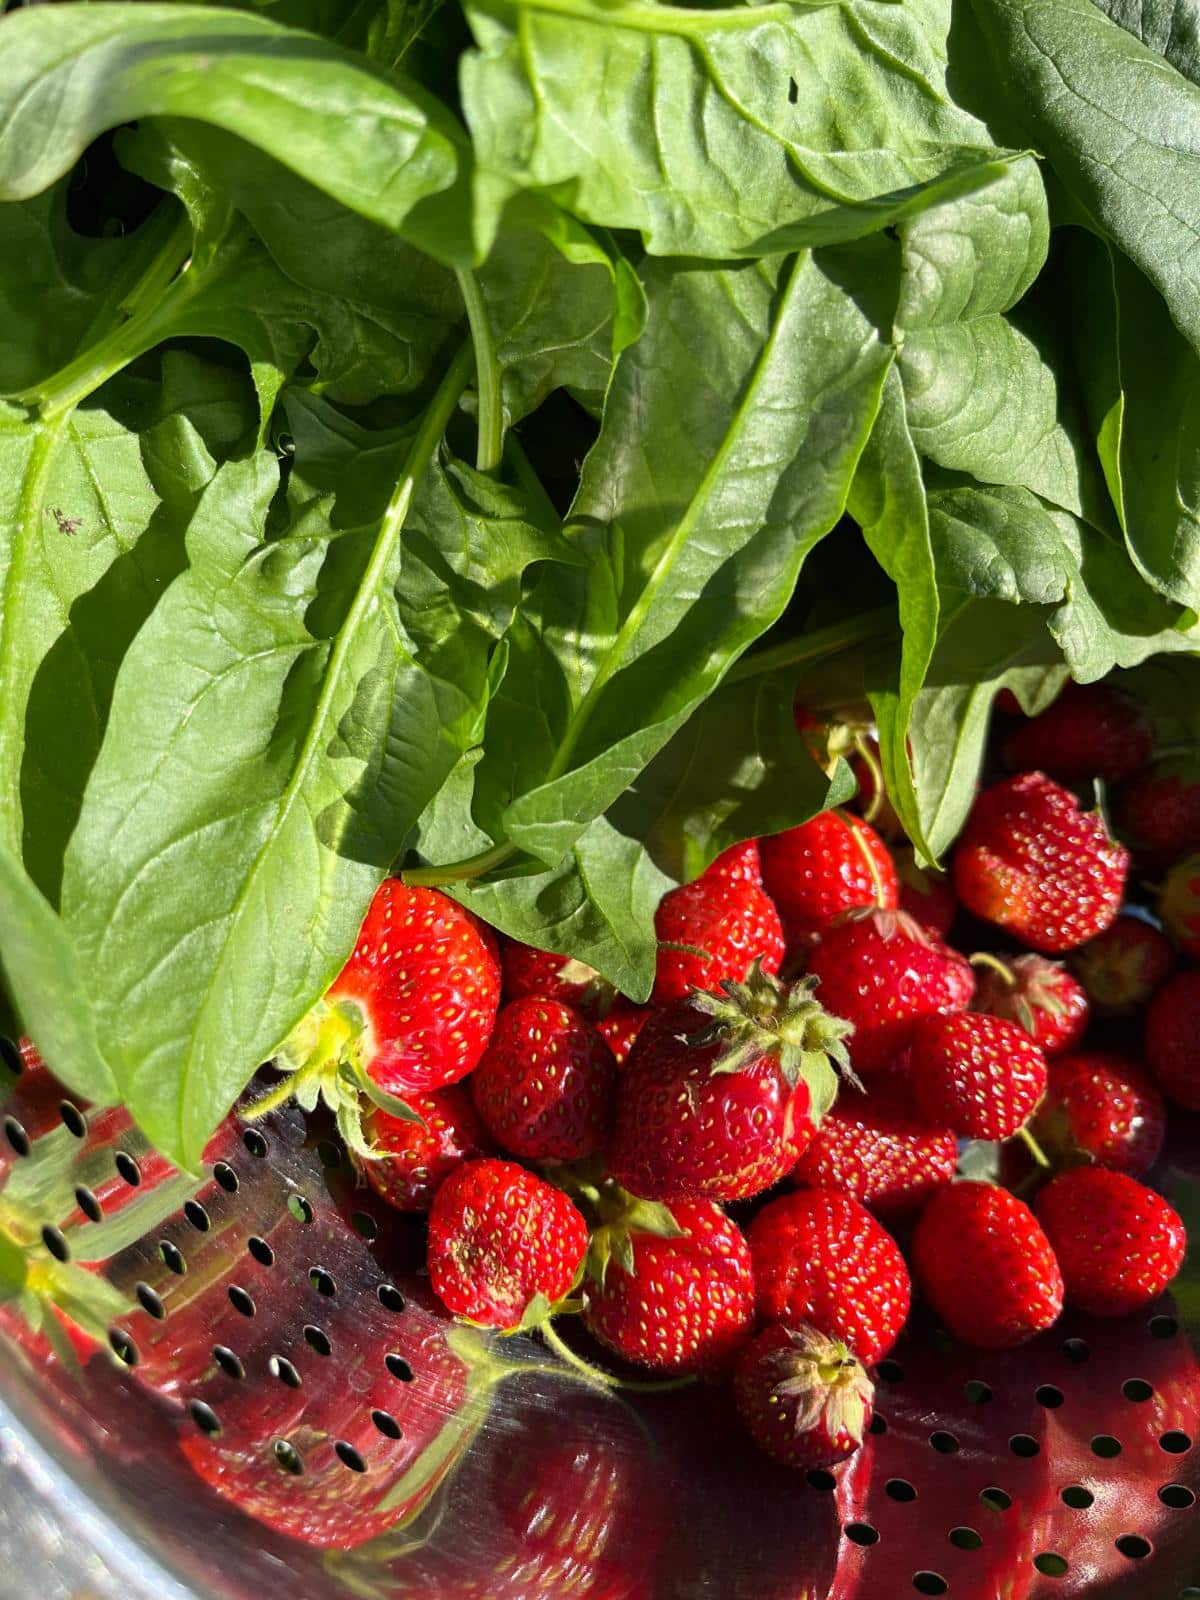 A small harvest of strawberries and spinach